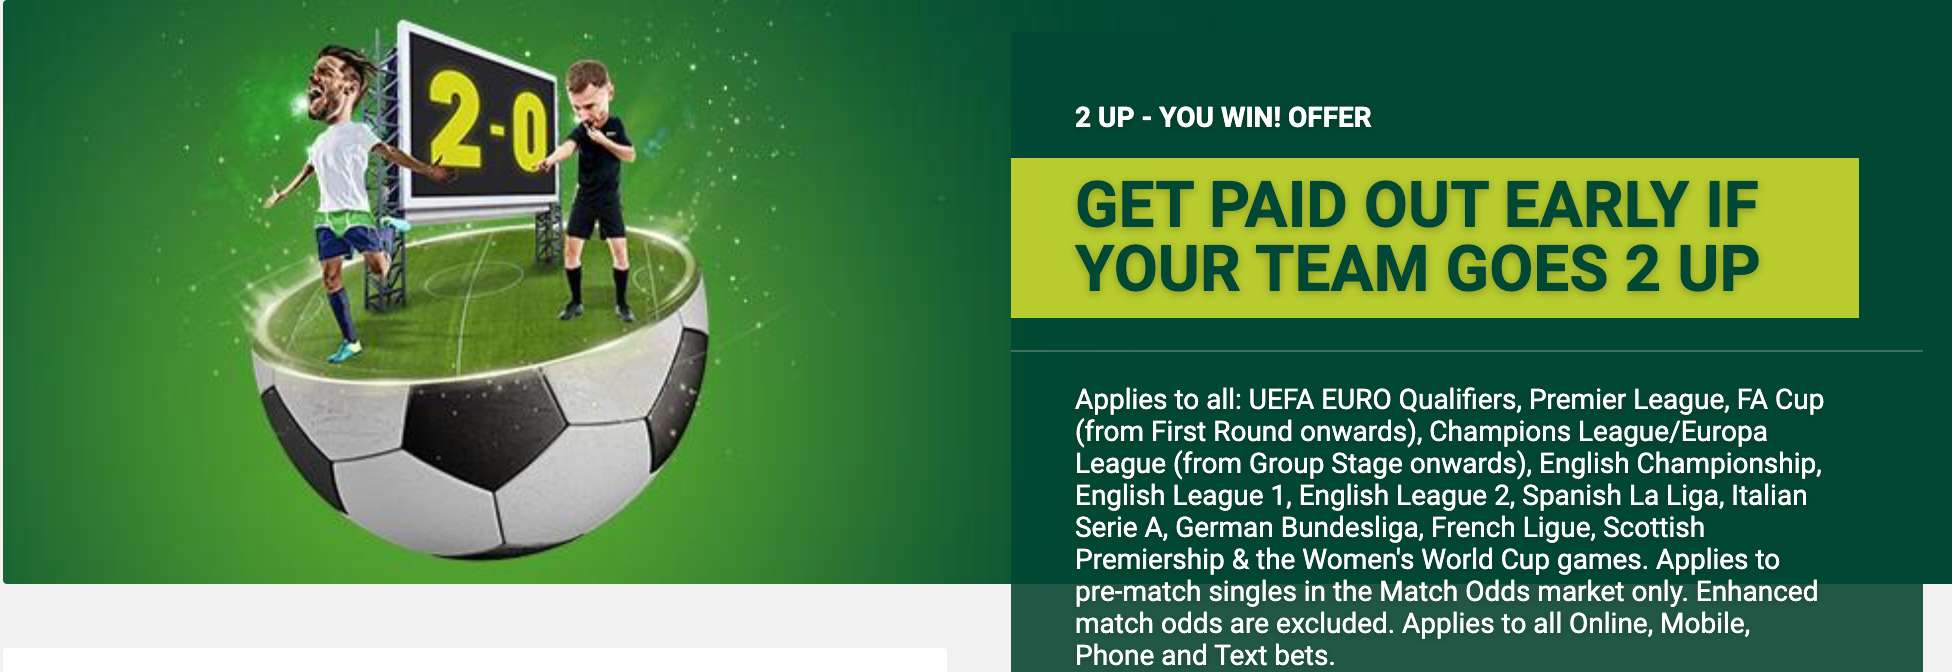 Paddy Power 2-up Offer